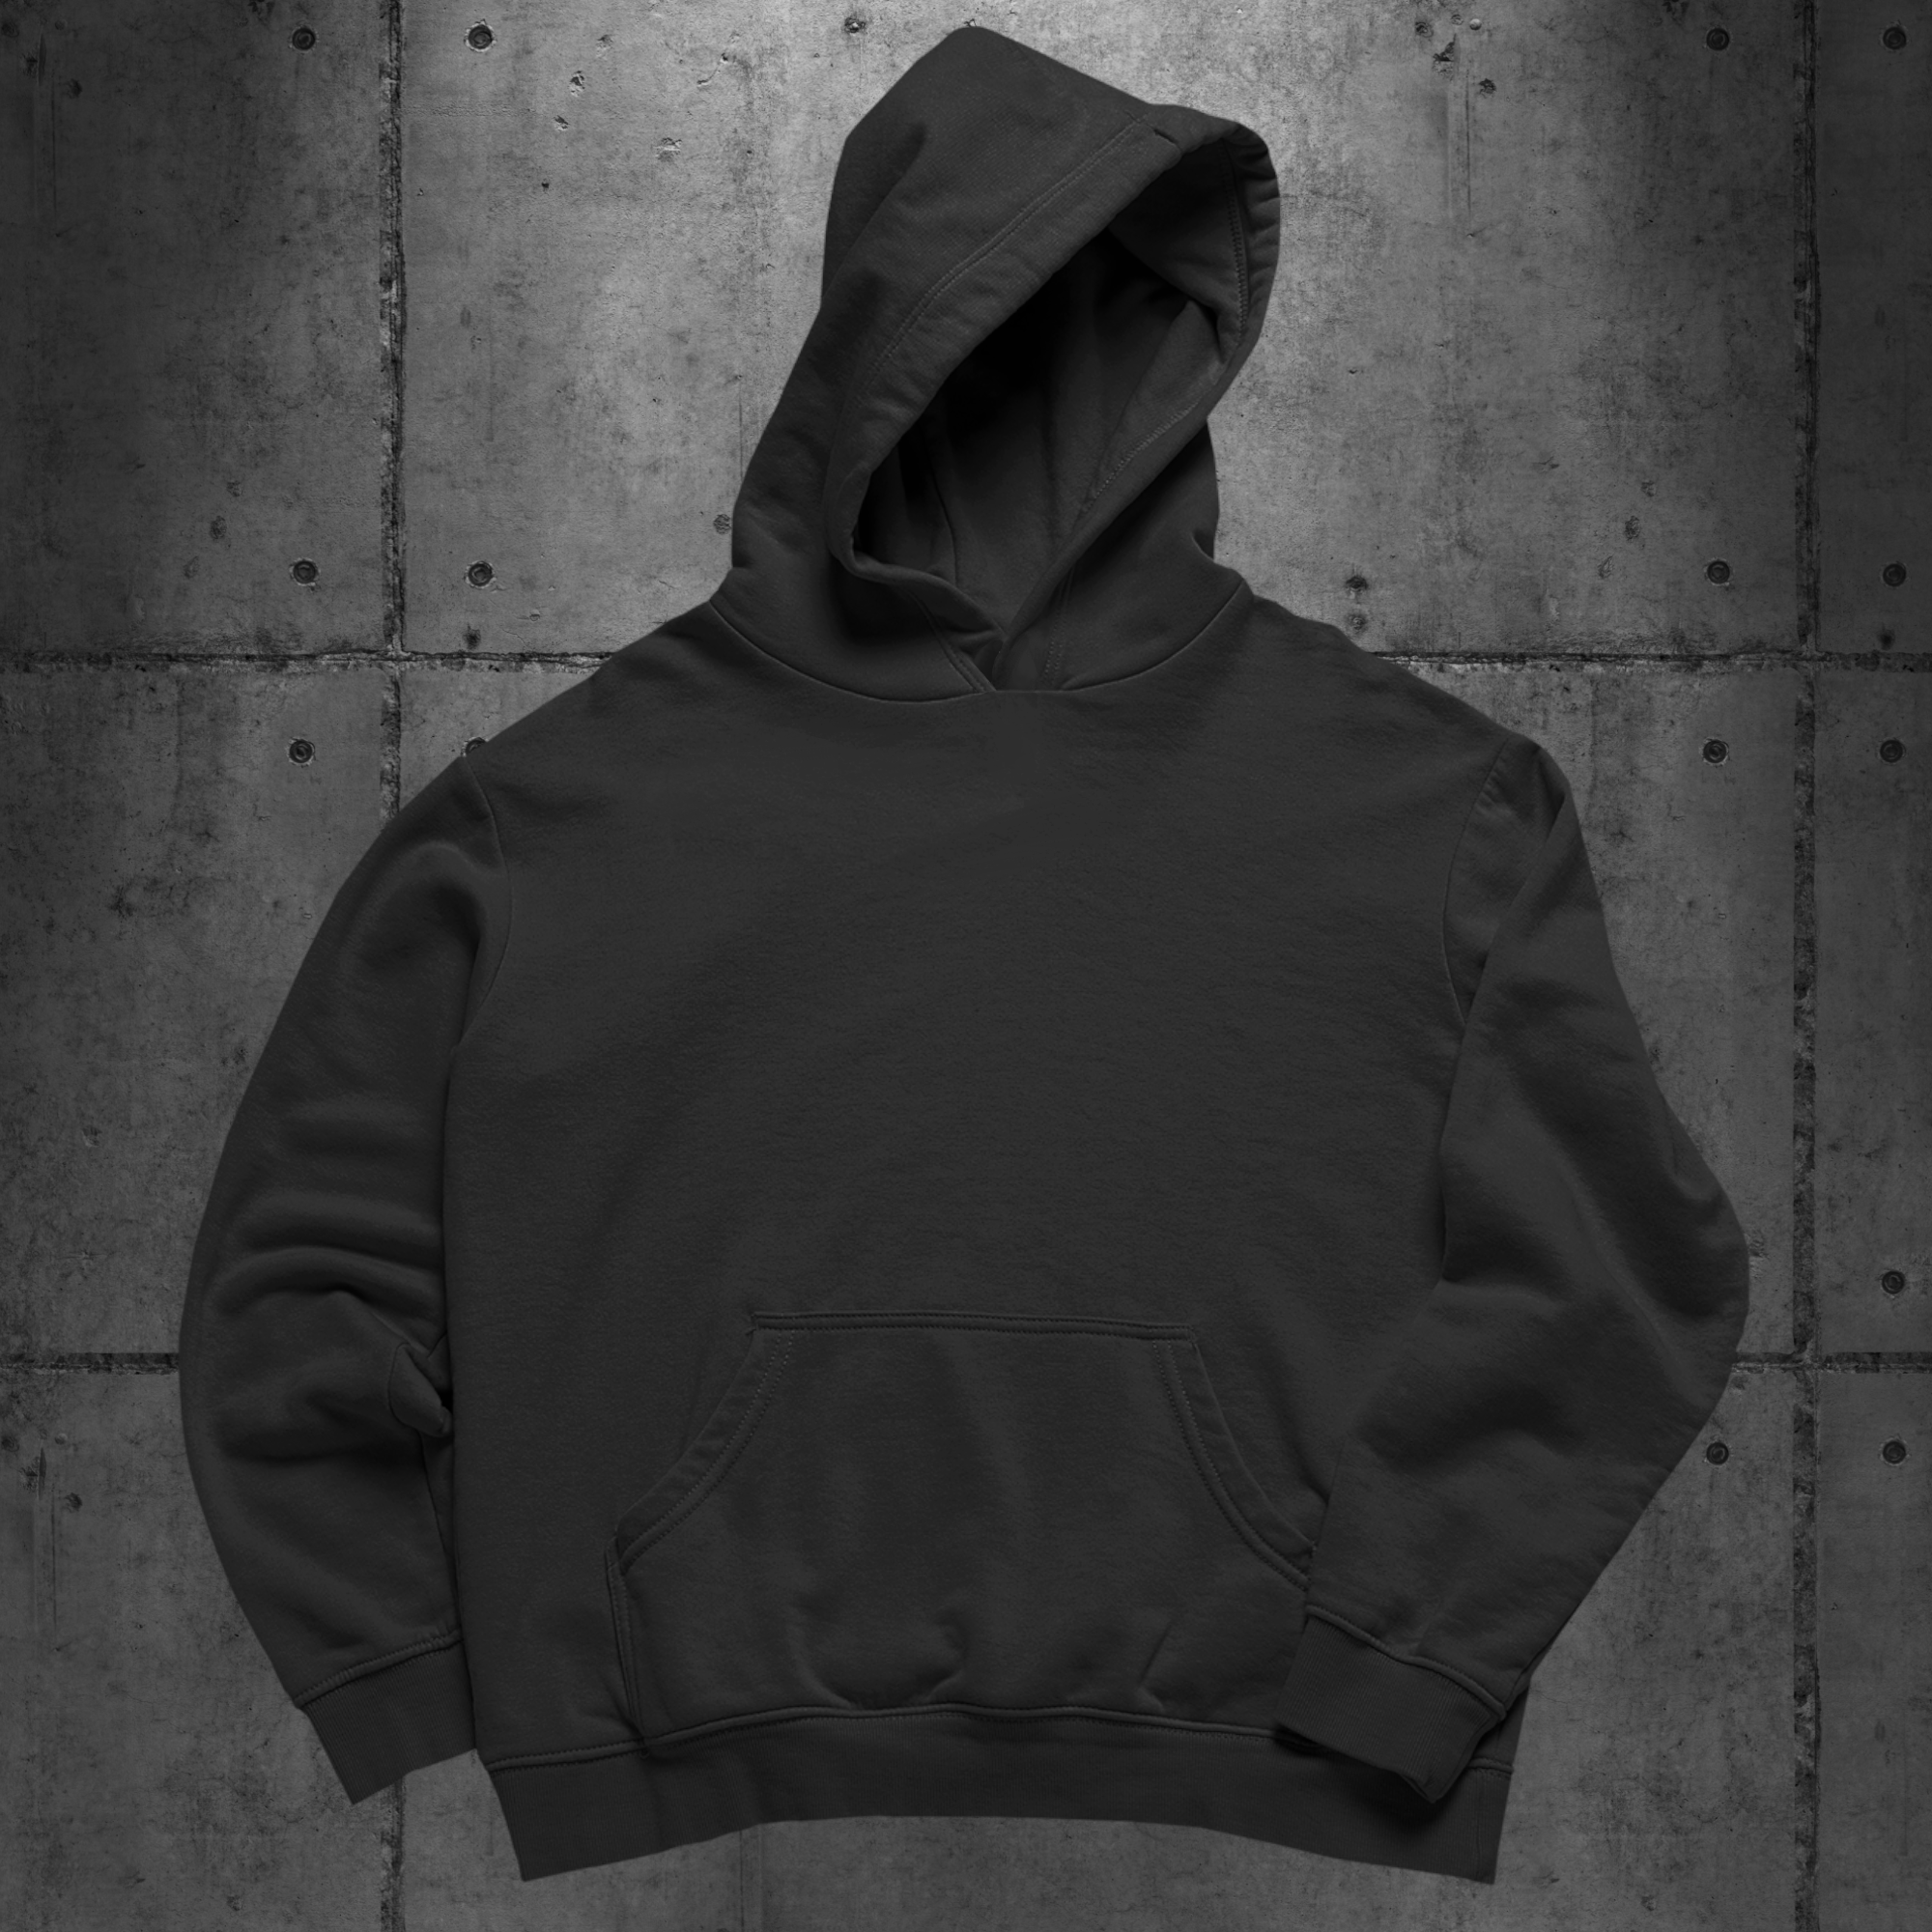 Escape From Reality Backpatch Hoodie